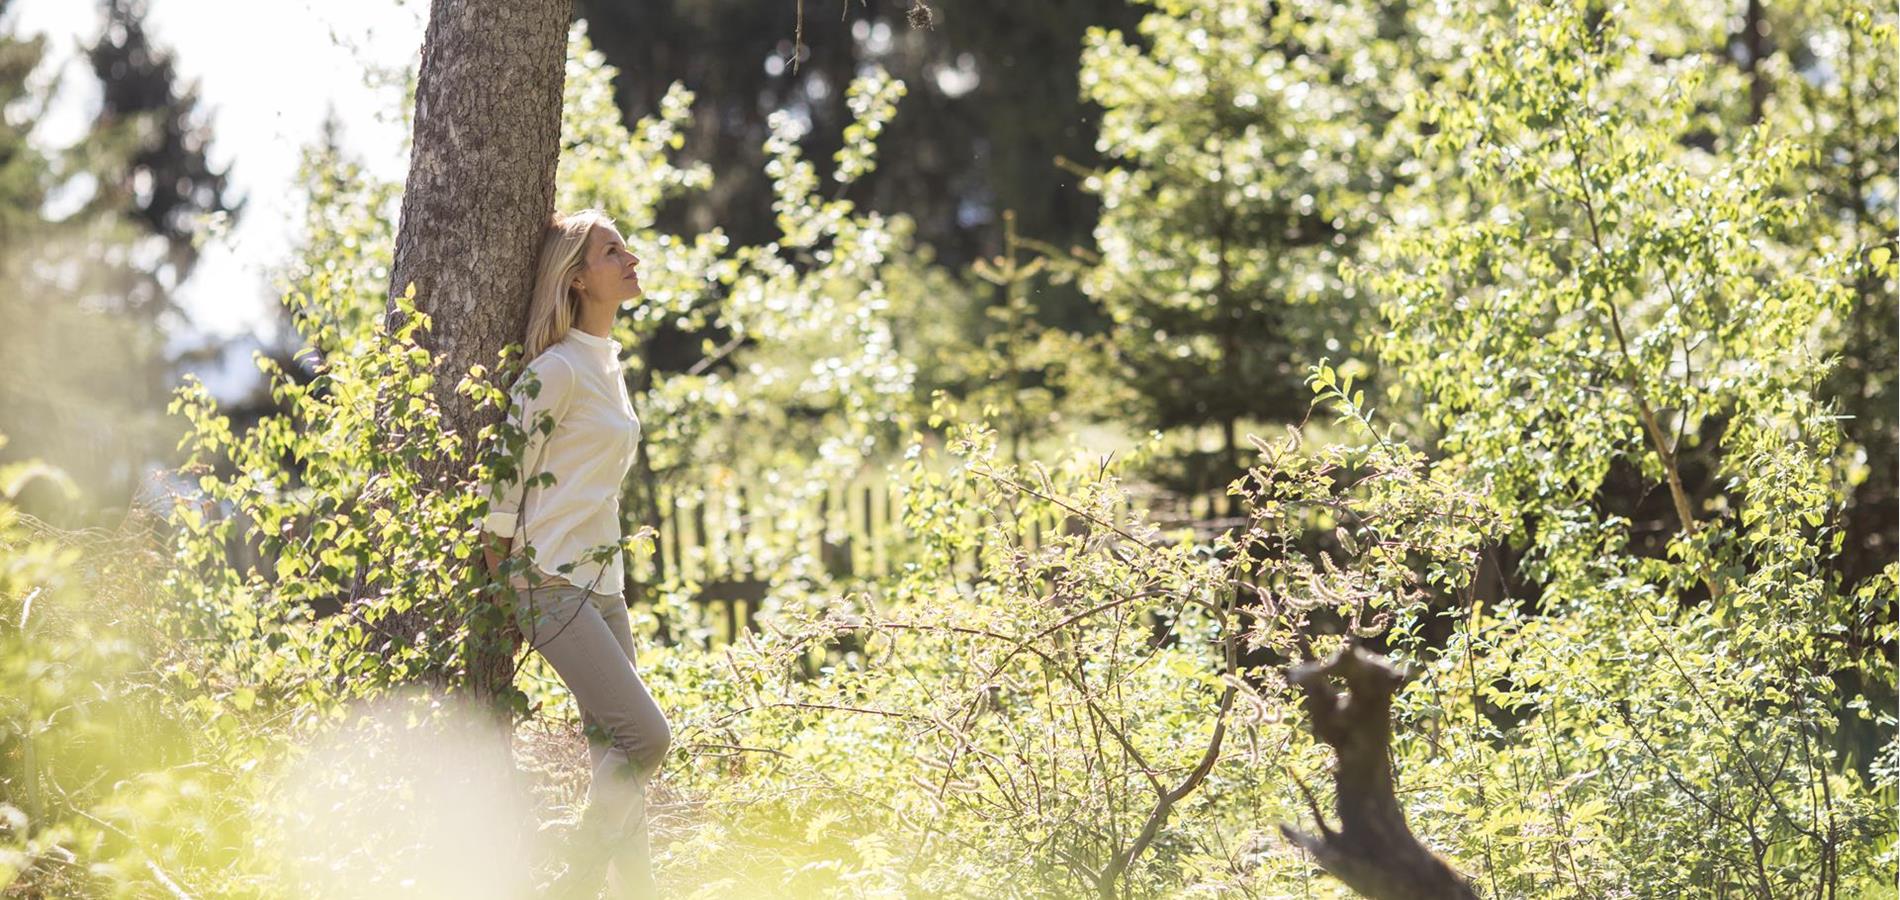 Forest bathing: More than just hugging trees?